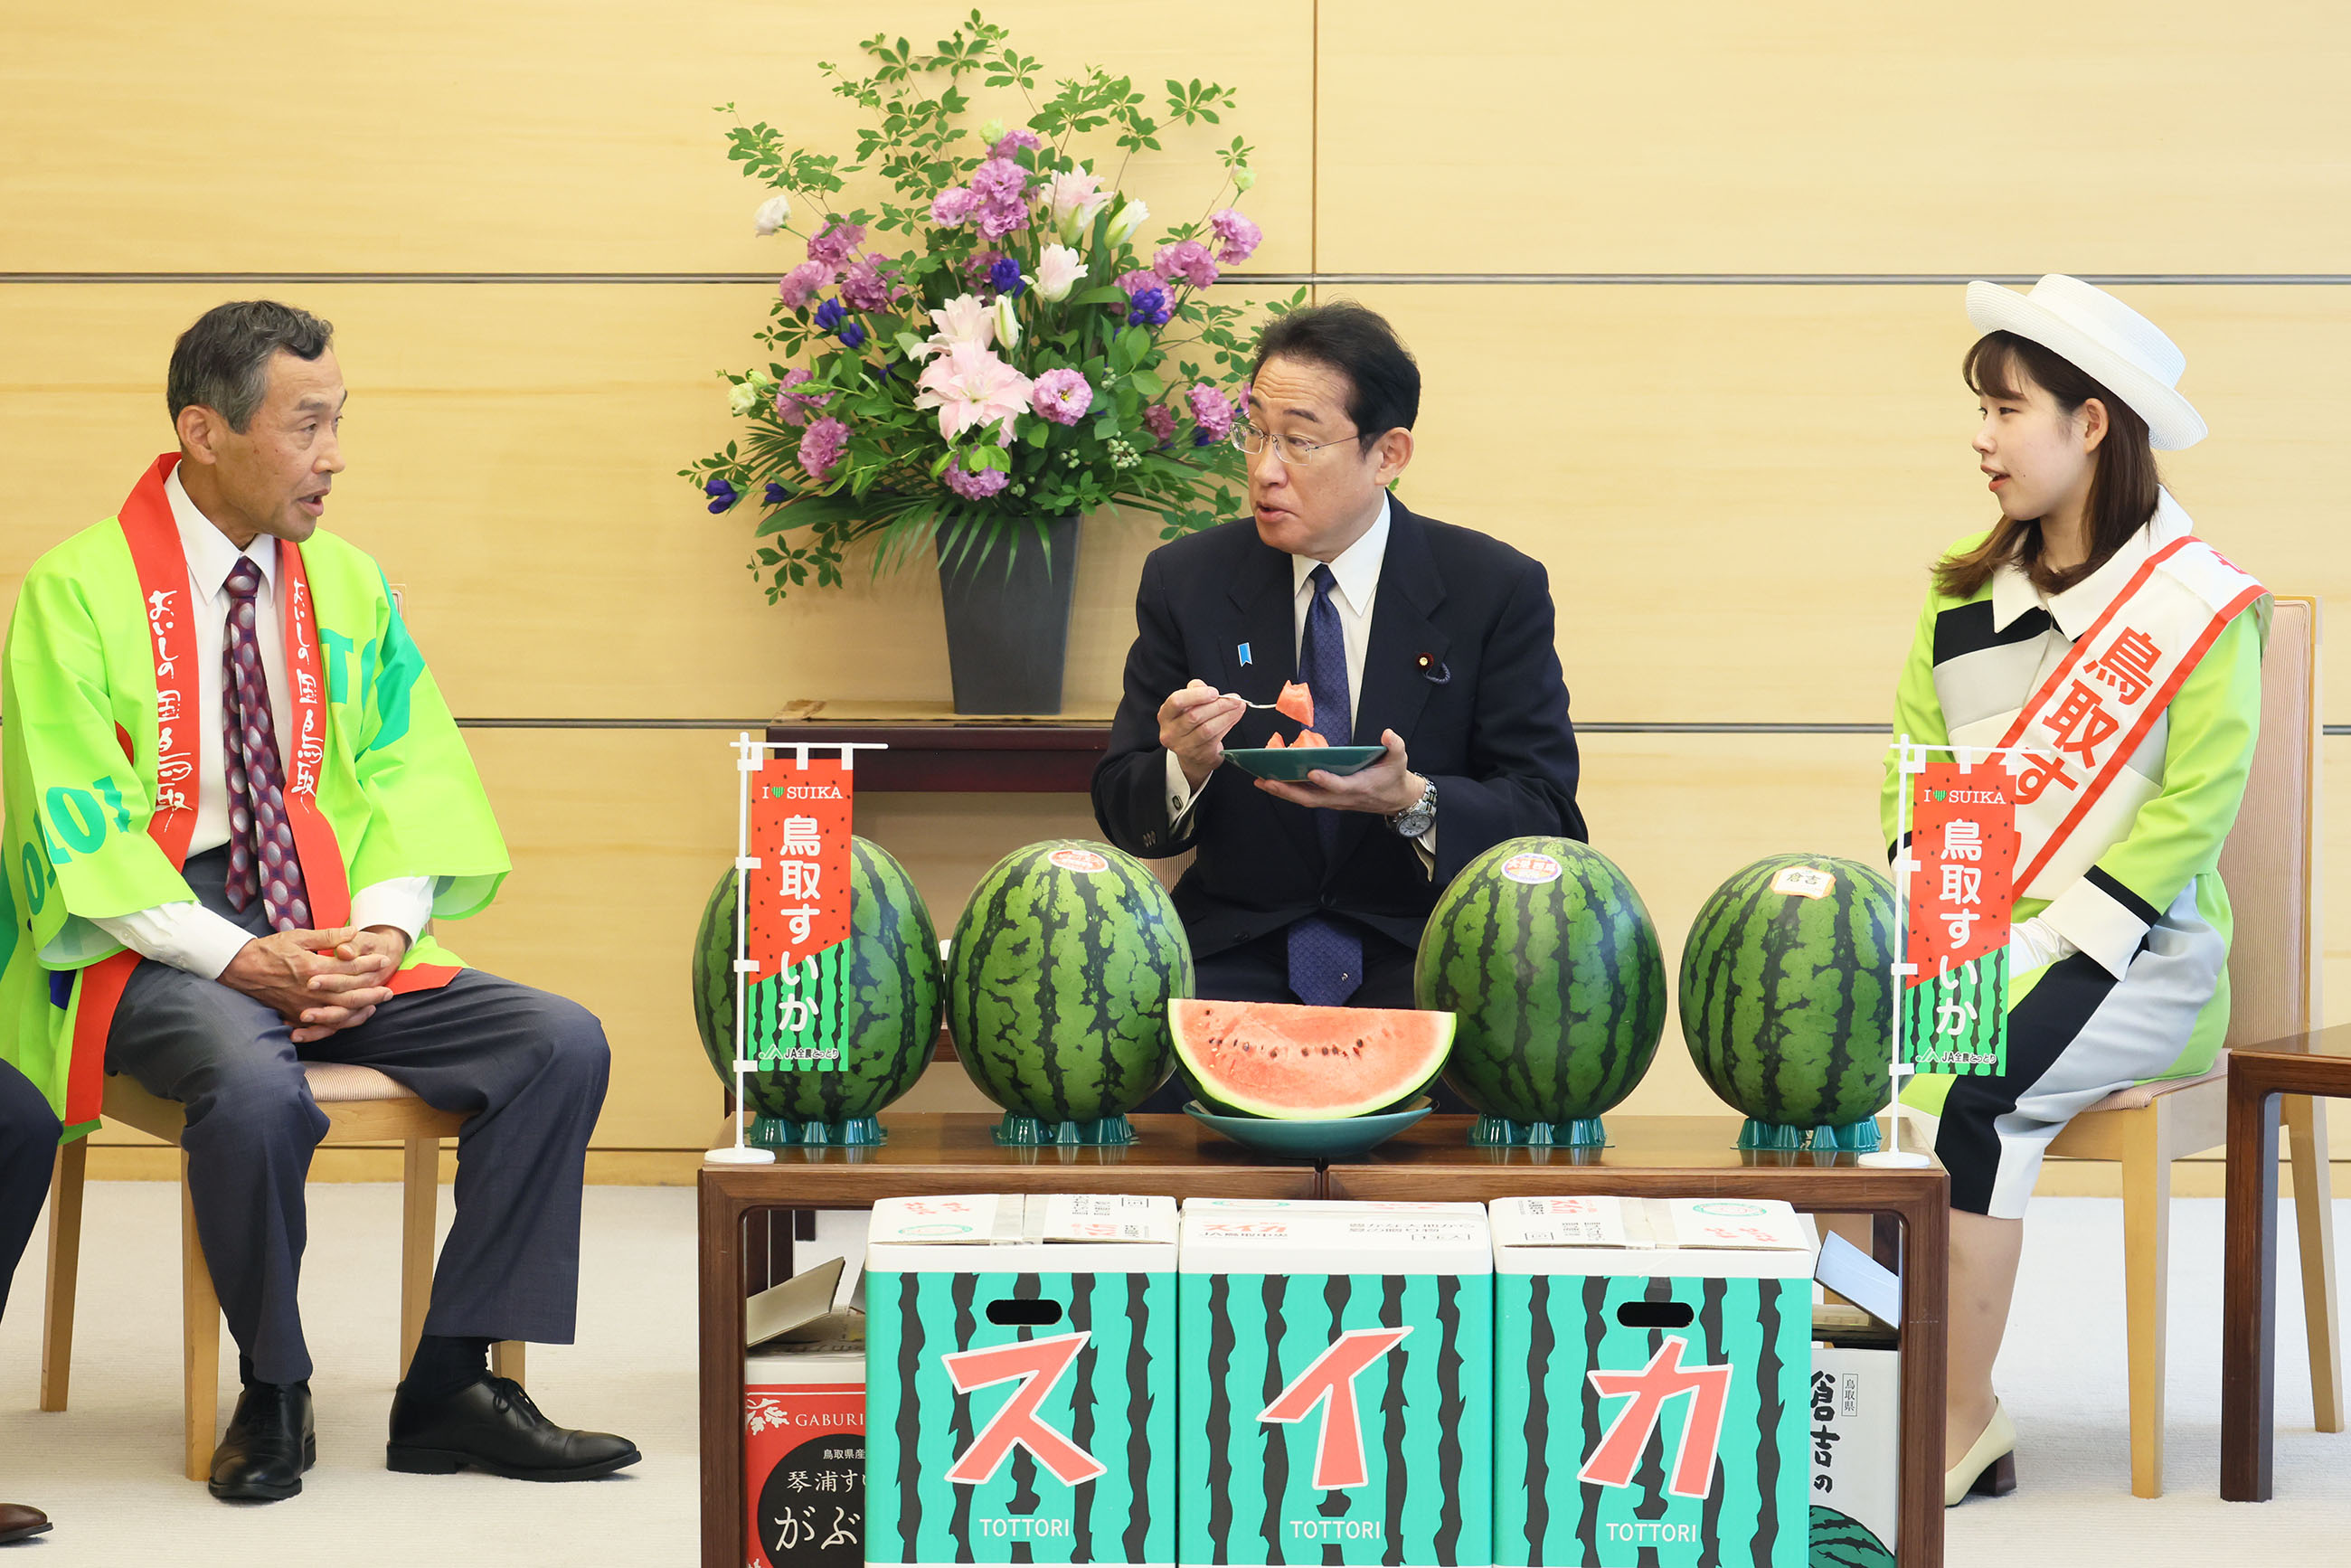 Prime Minister Kishida being presented with watermelons (4)